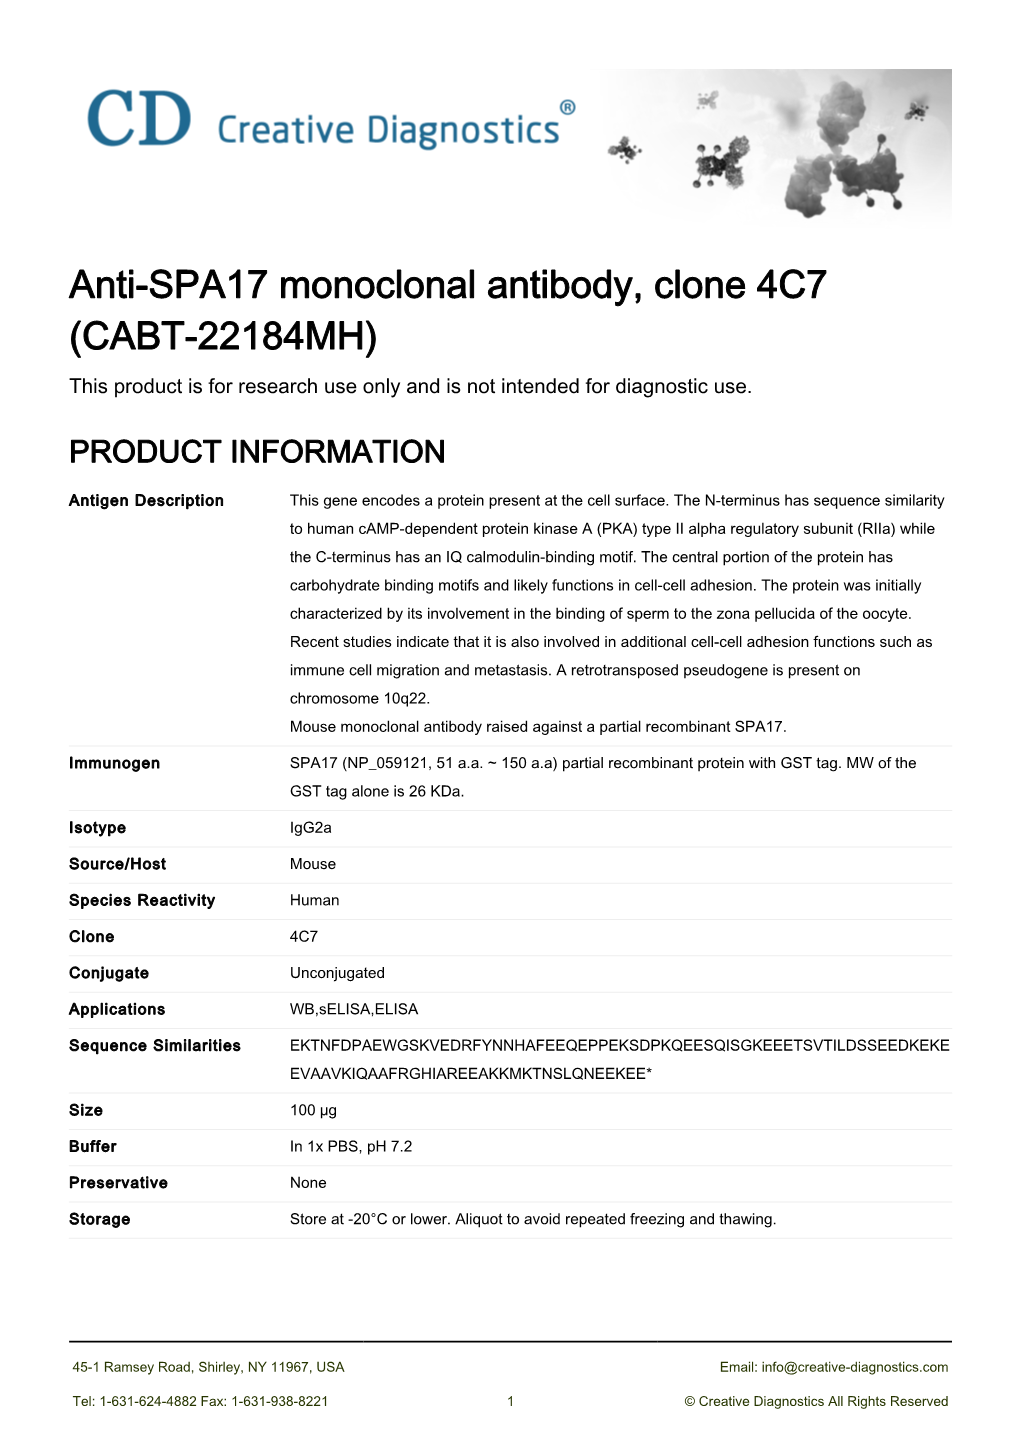 Anti-SPA17 Monoclonal Antibody, Clone 4C7 (CABT-22184MH) This Product Is for Research Use Only and Is Not Intended for Diagnostic Use